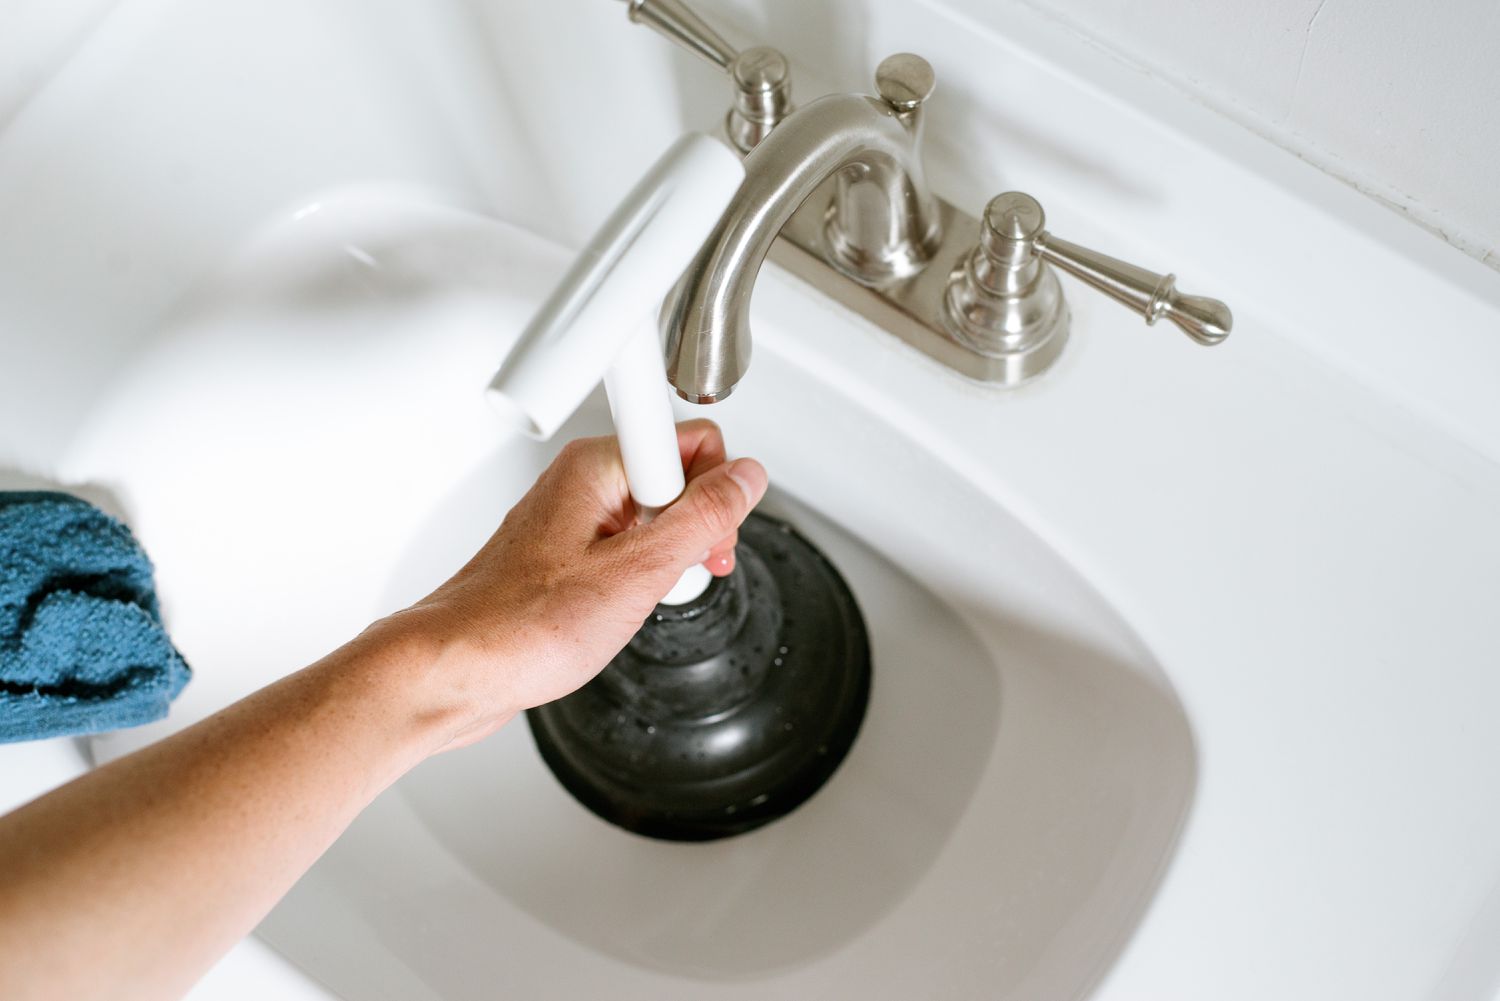 How To Unclog A Sink In Six Simple Steps